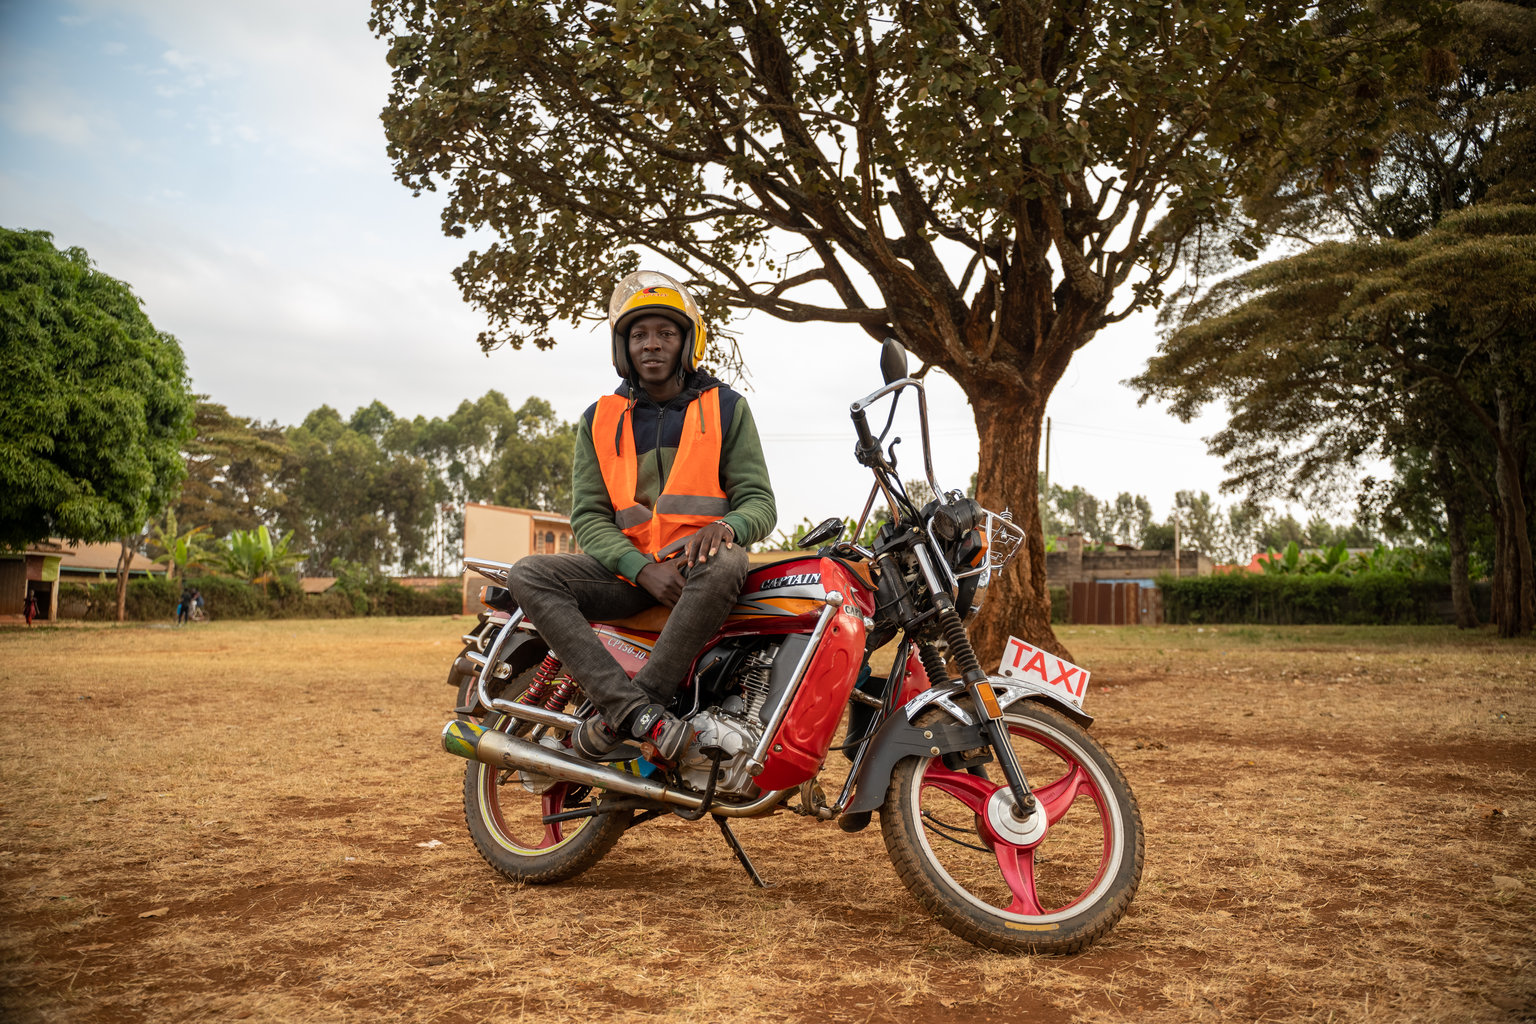 A man in an orange vest wears his helmet sitting on top of a motorcycle that he drives as a taxi service.